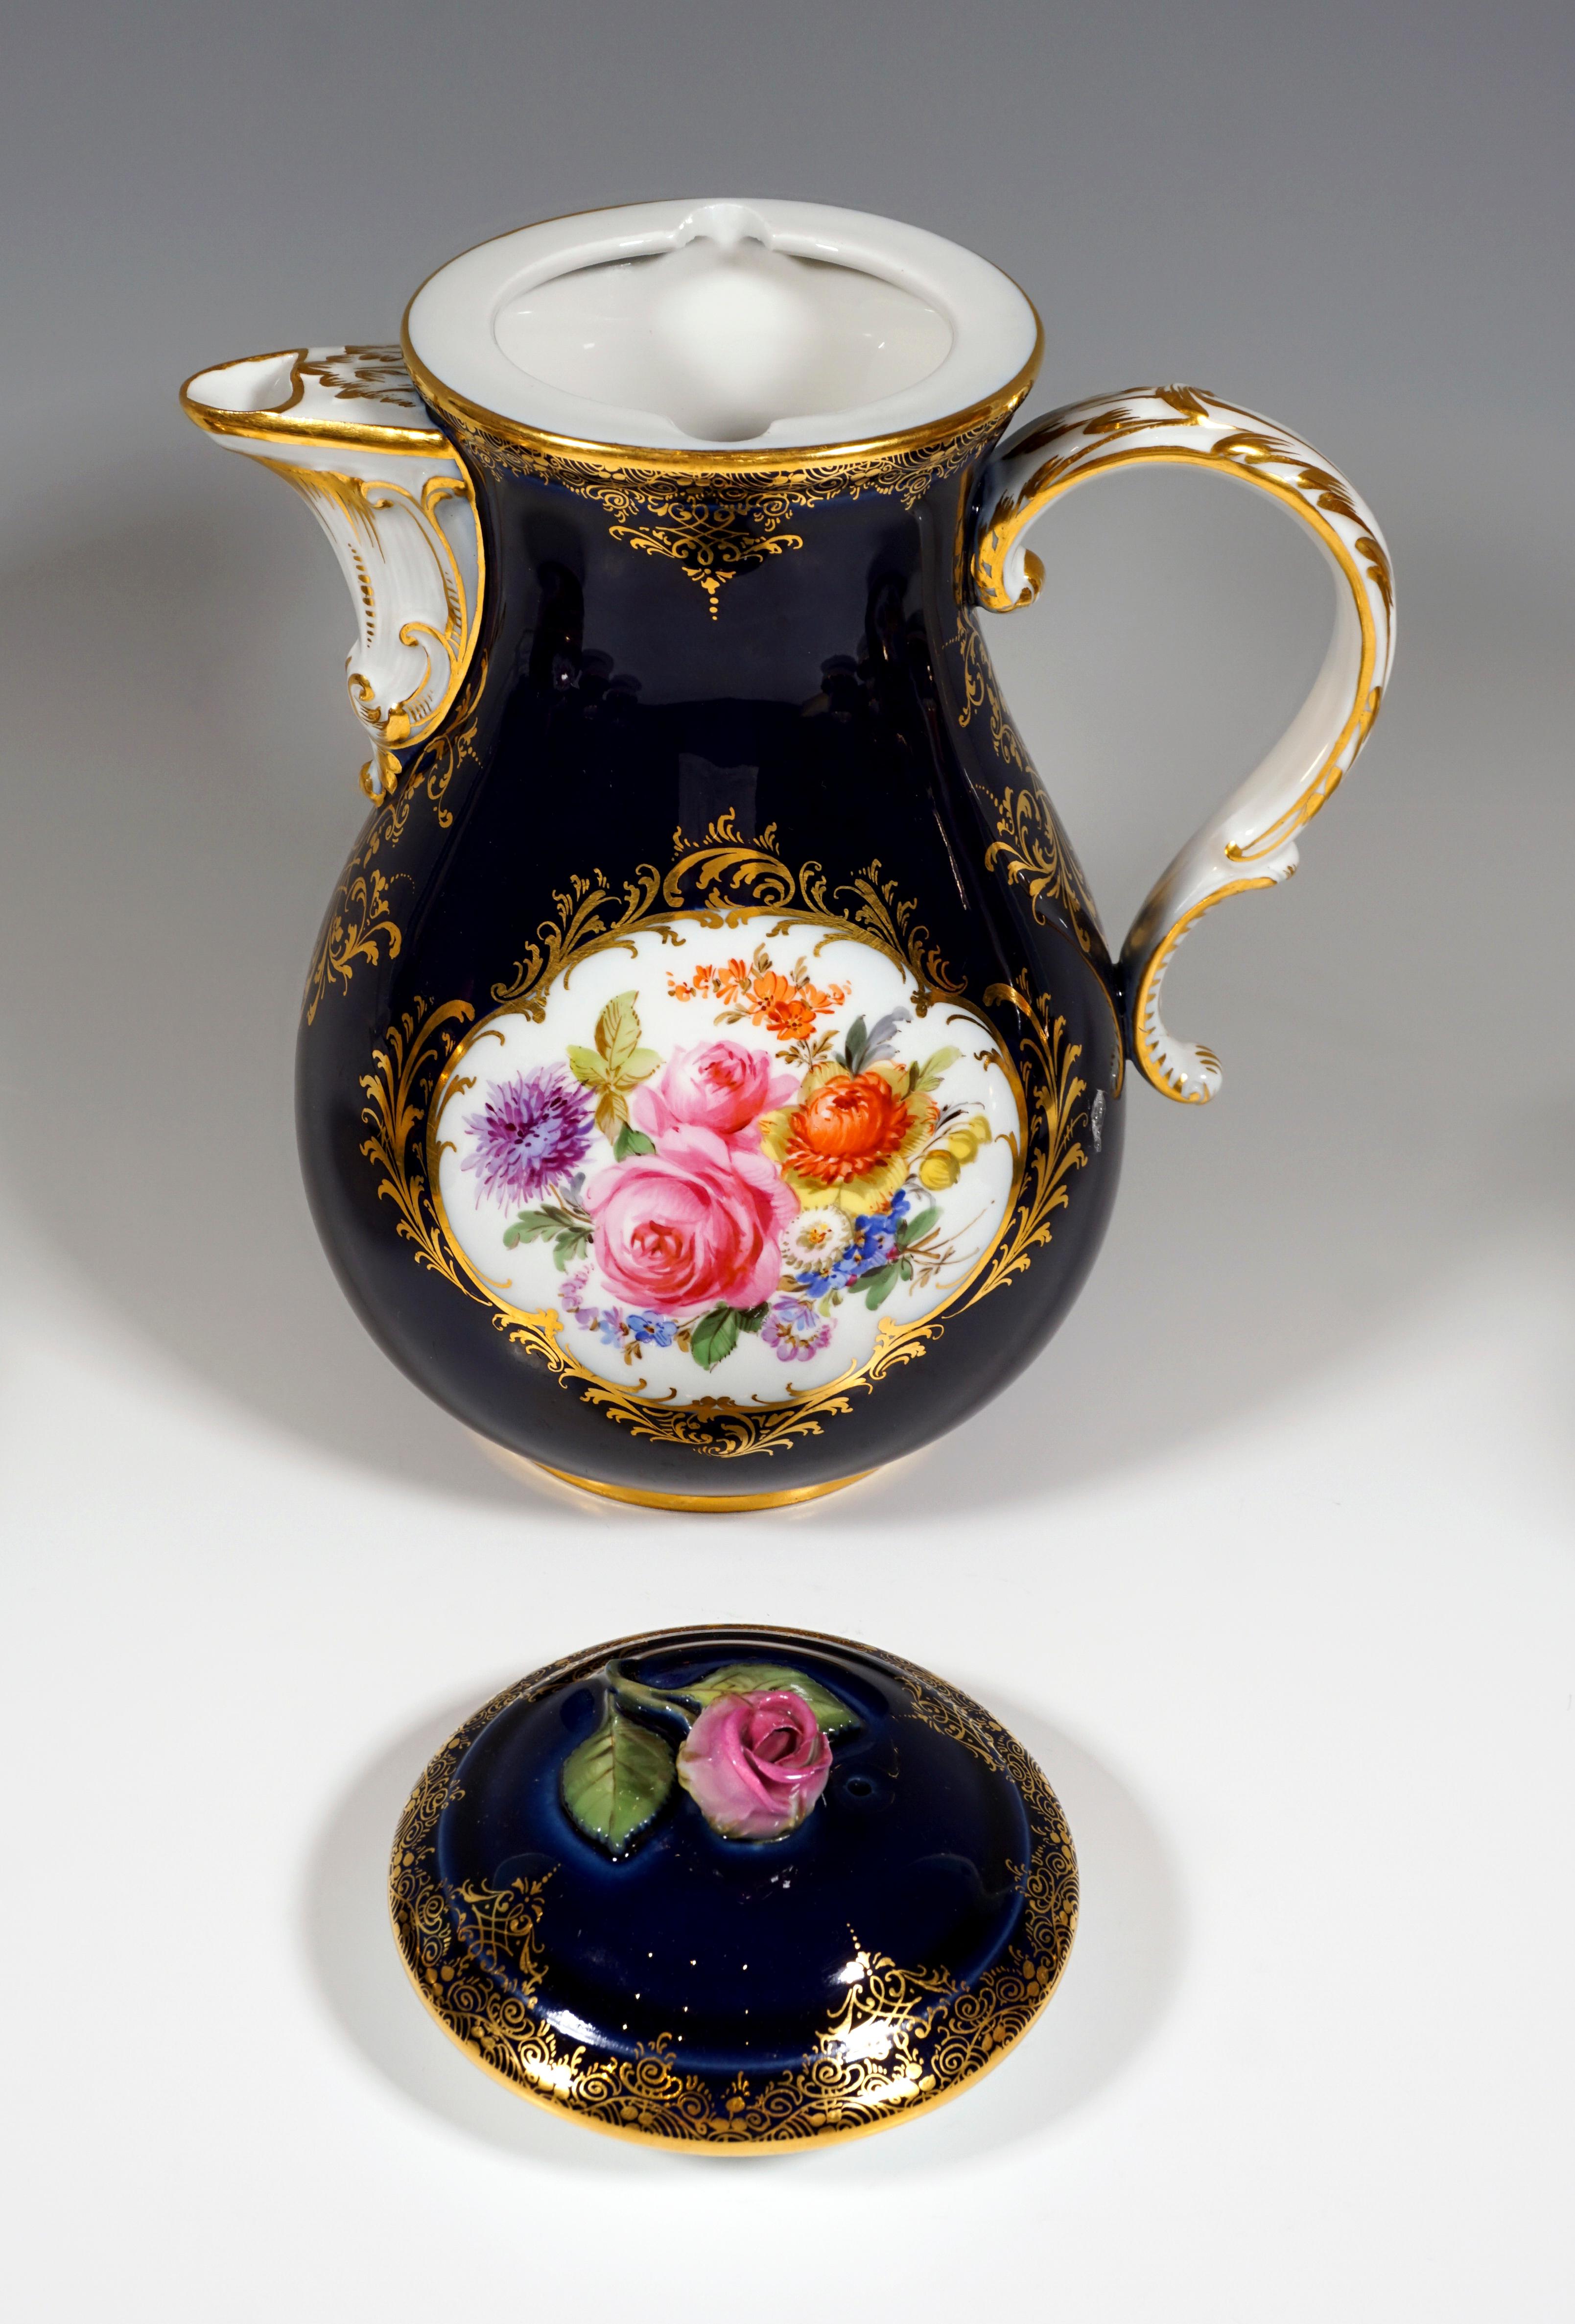 Baroque 19th Century Meissen Coffee Set for 6 Persons, Cobalt, Bouquets and Gold Decor